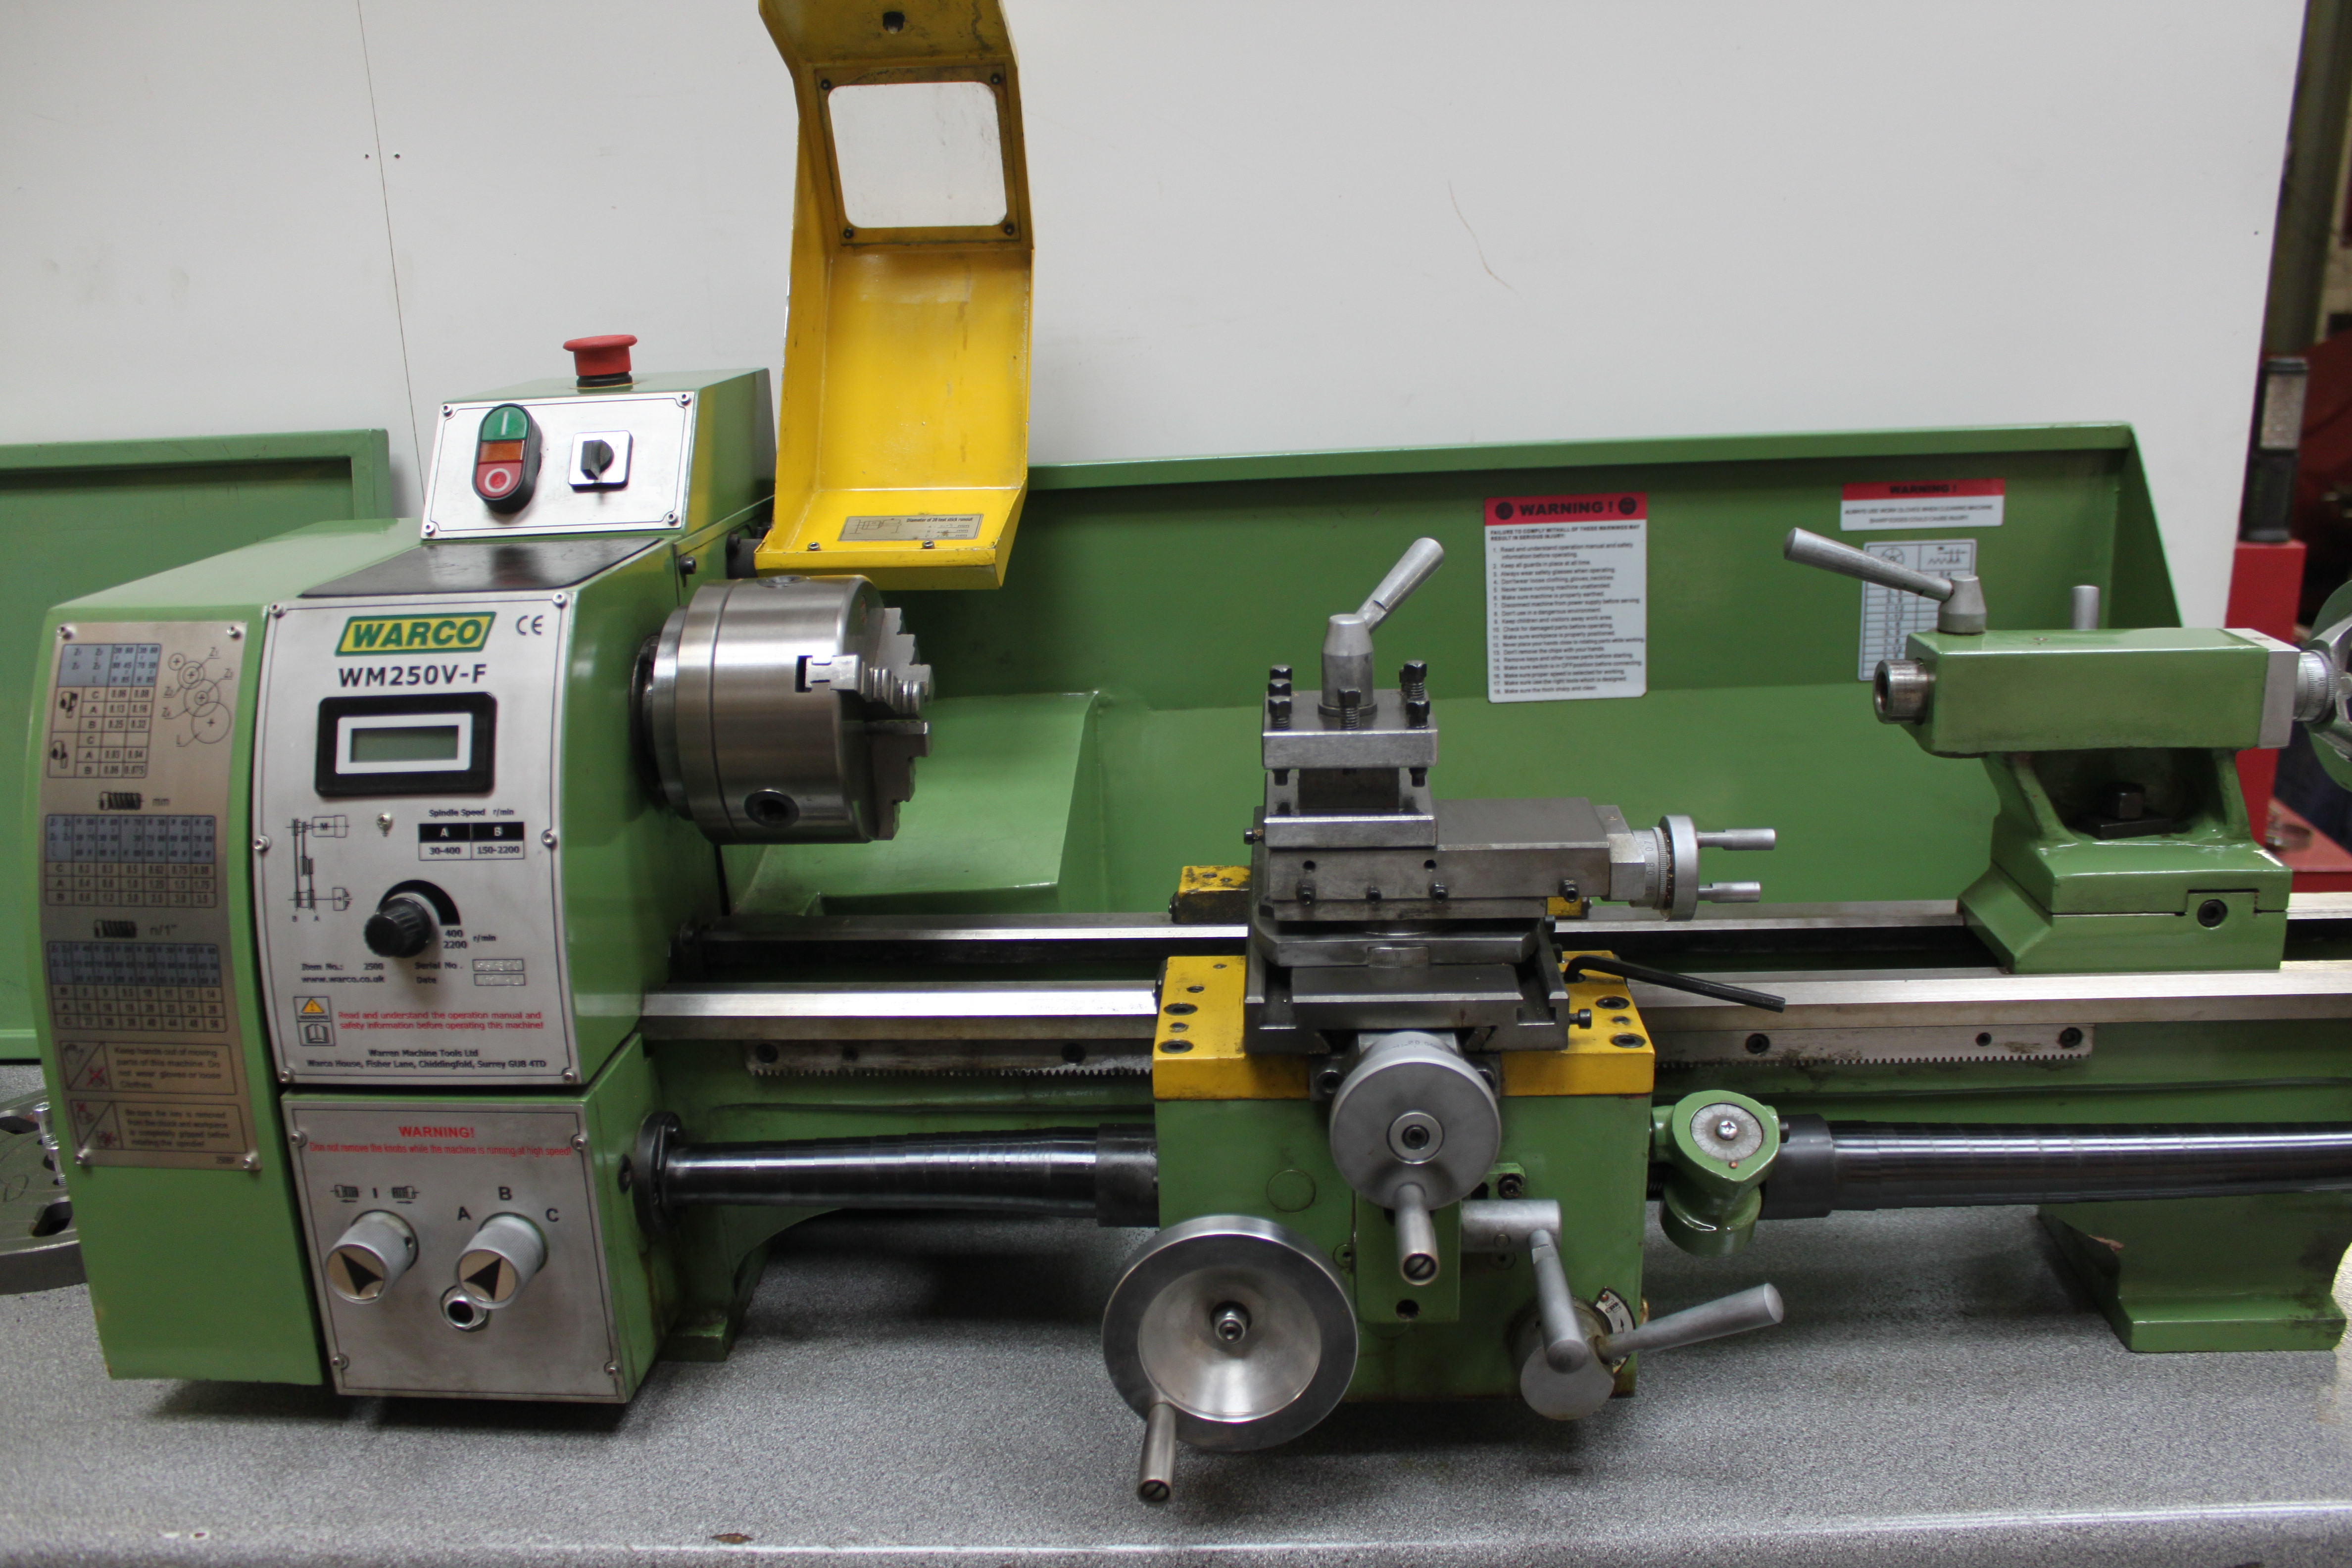 Warco WM250V-F  Variable Speed 240 v Metal turning Lathe And Accessories